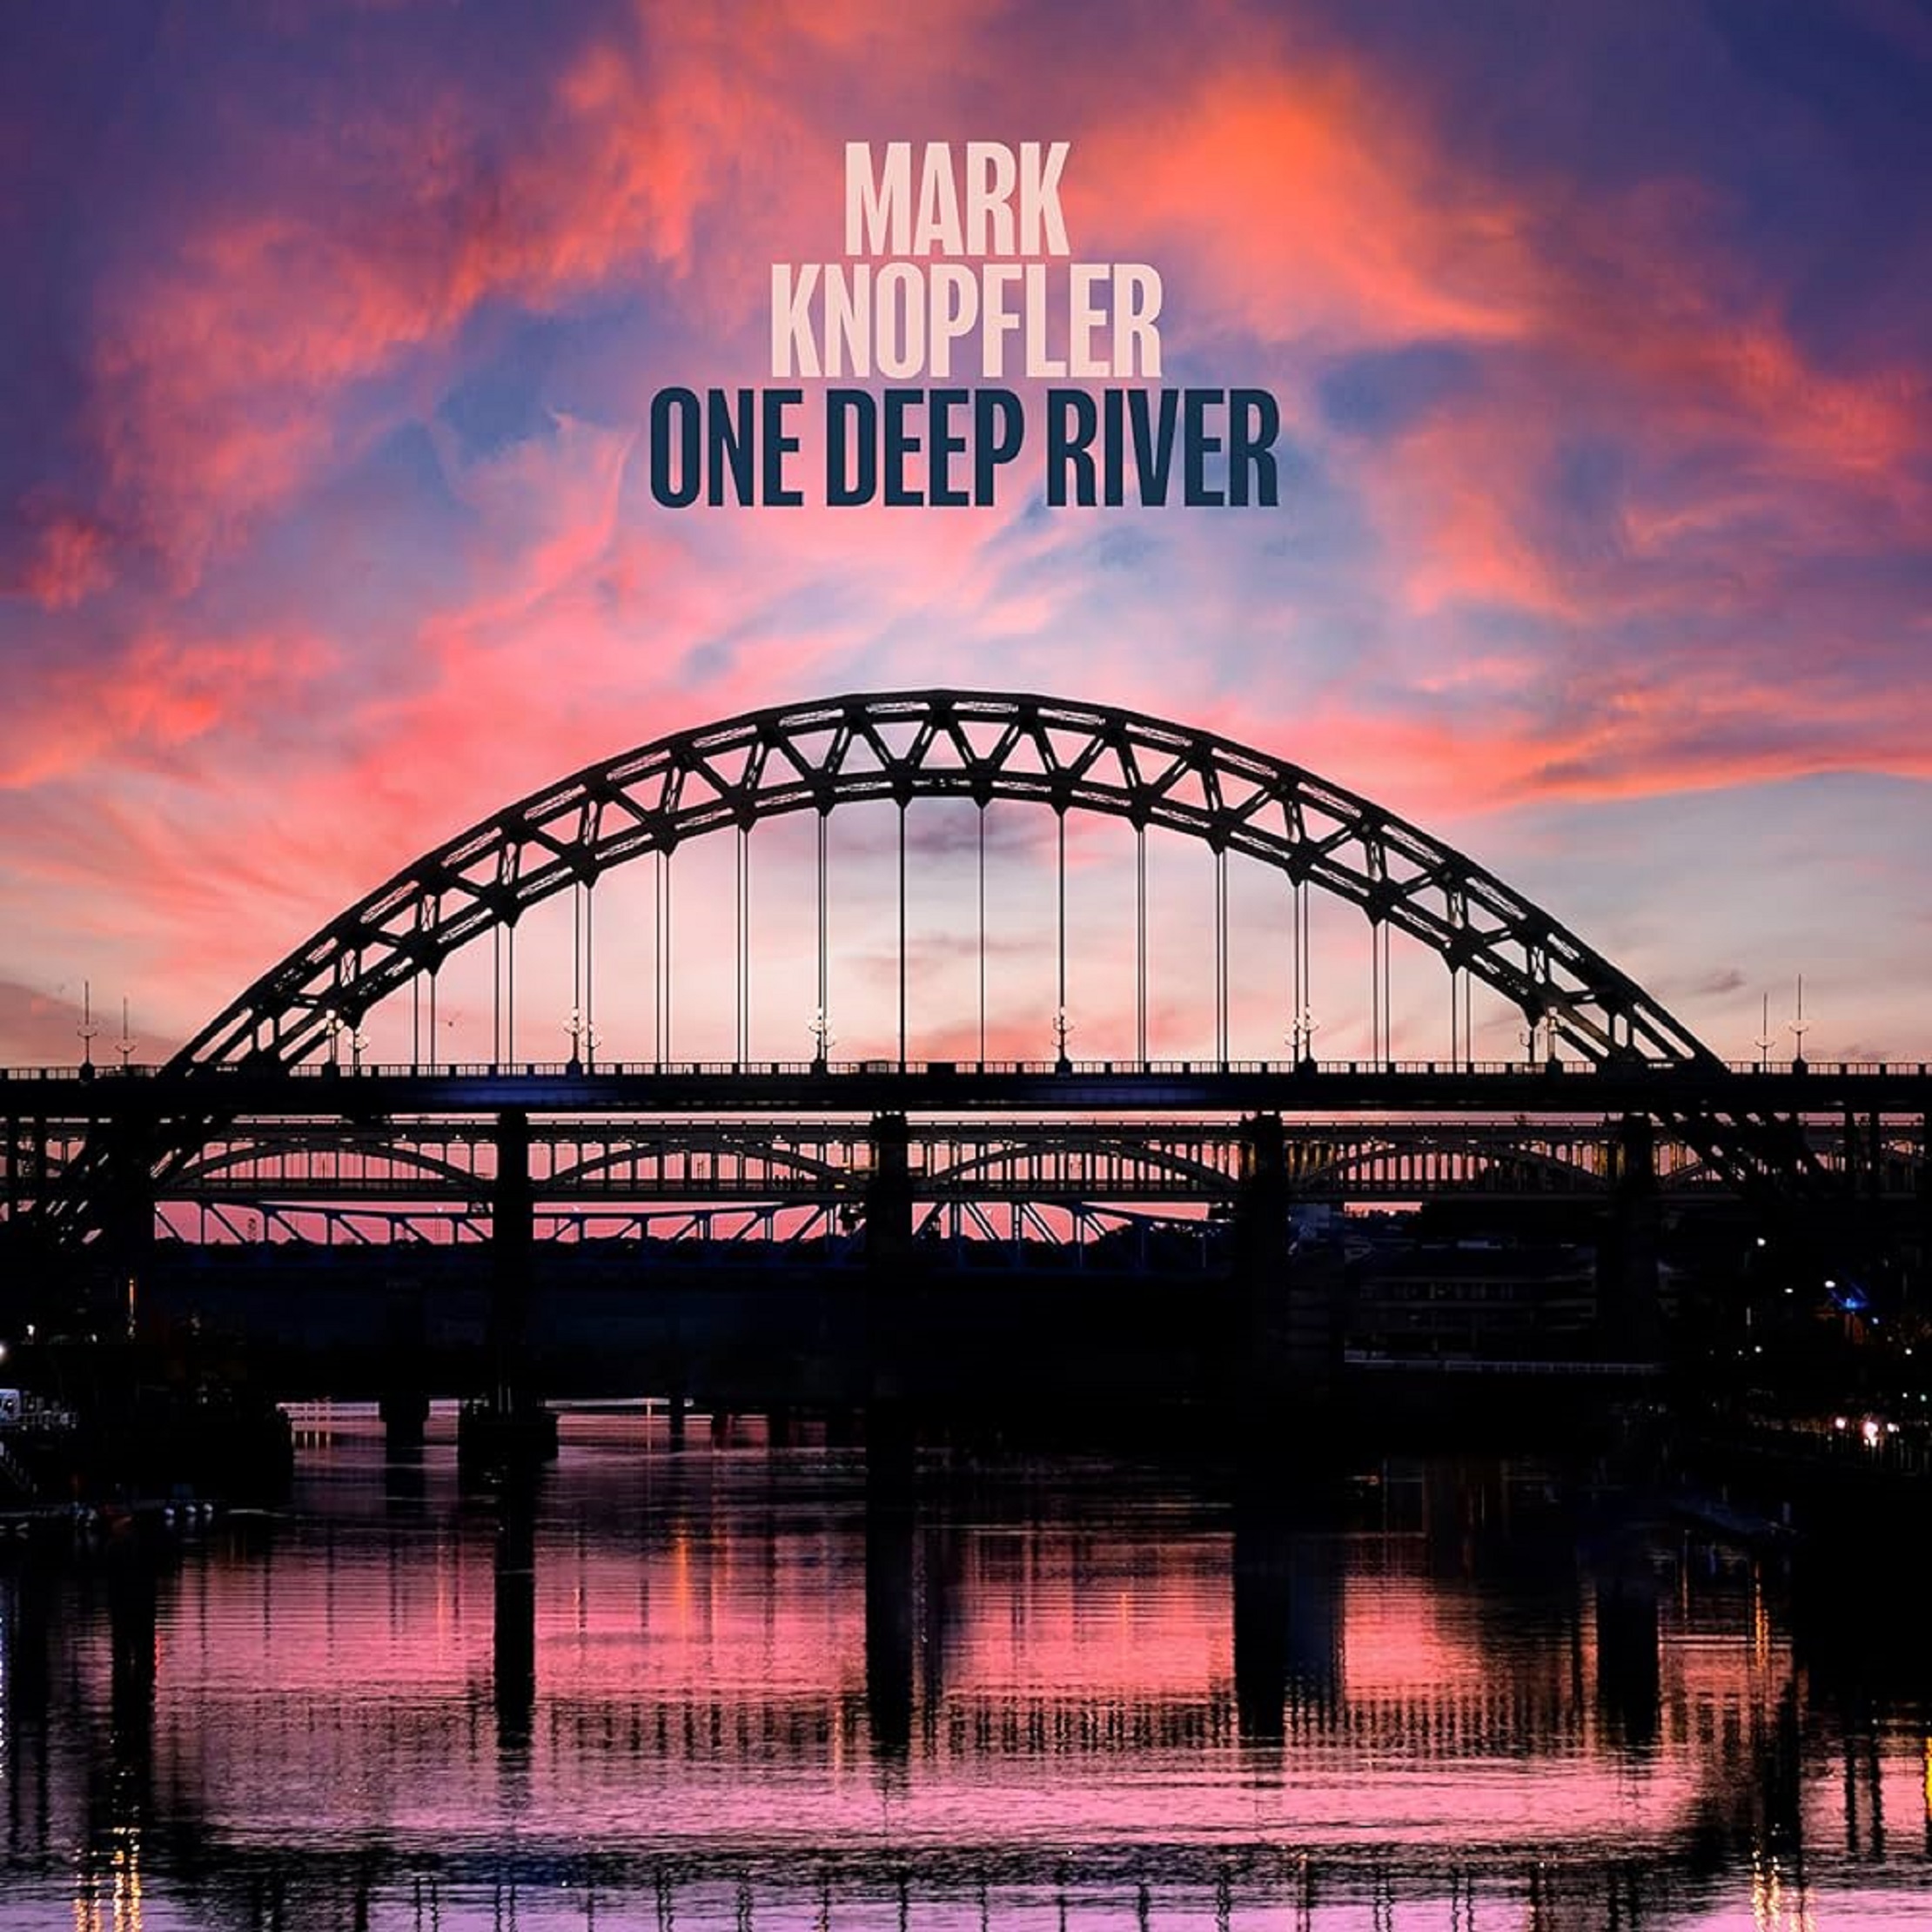 Mark Knopfler's 'One Deep River': A Review